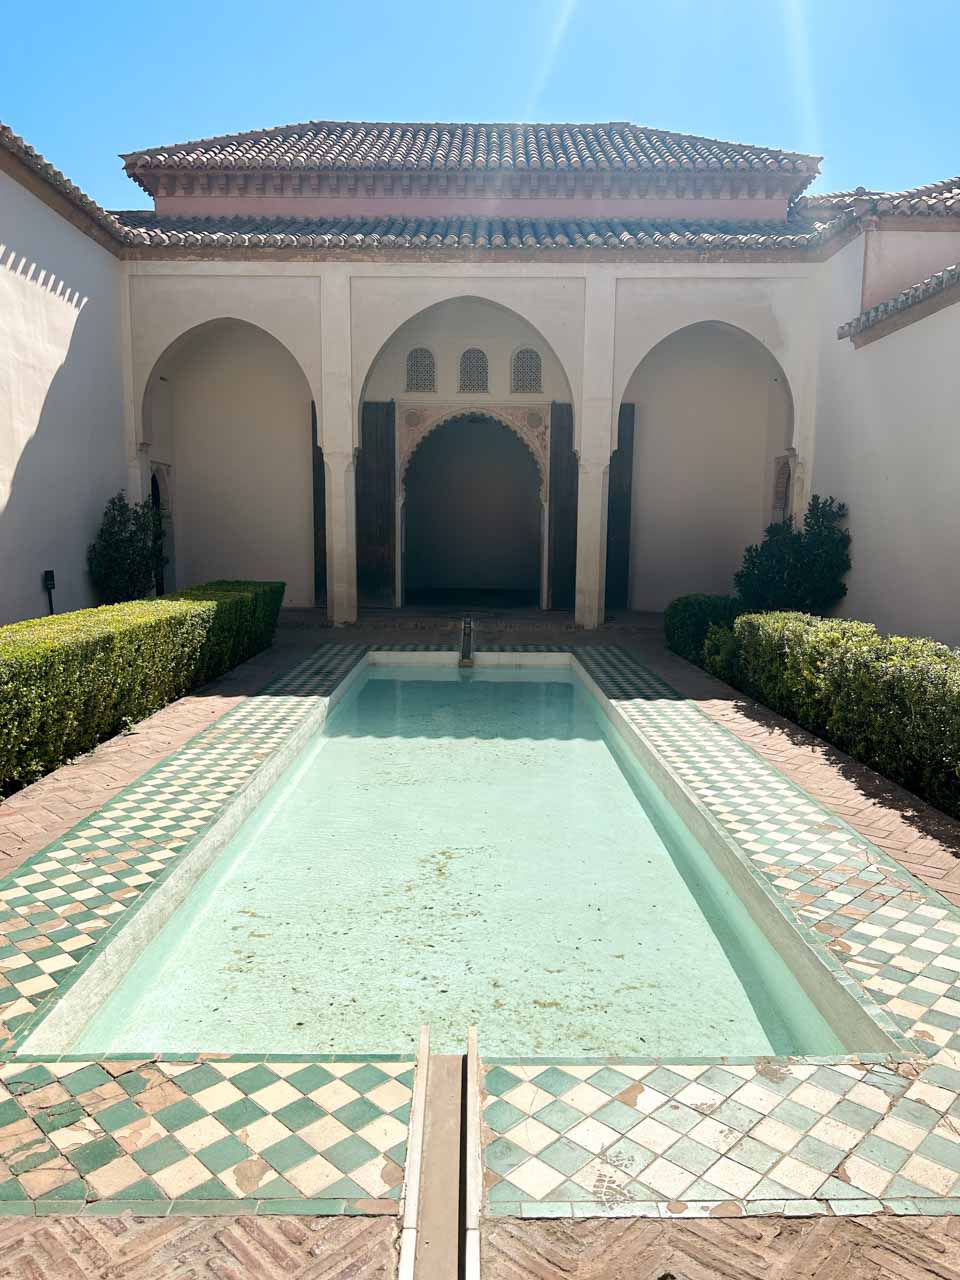 A pool in a traditional courtyard with tiled edges, surrounded by manicured hedges and archways inside the Alcazaba of Malaga